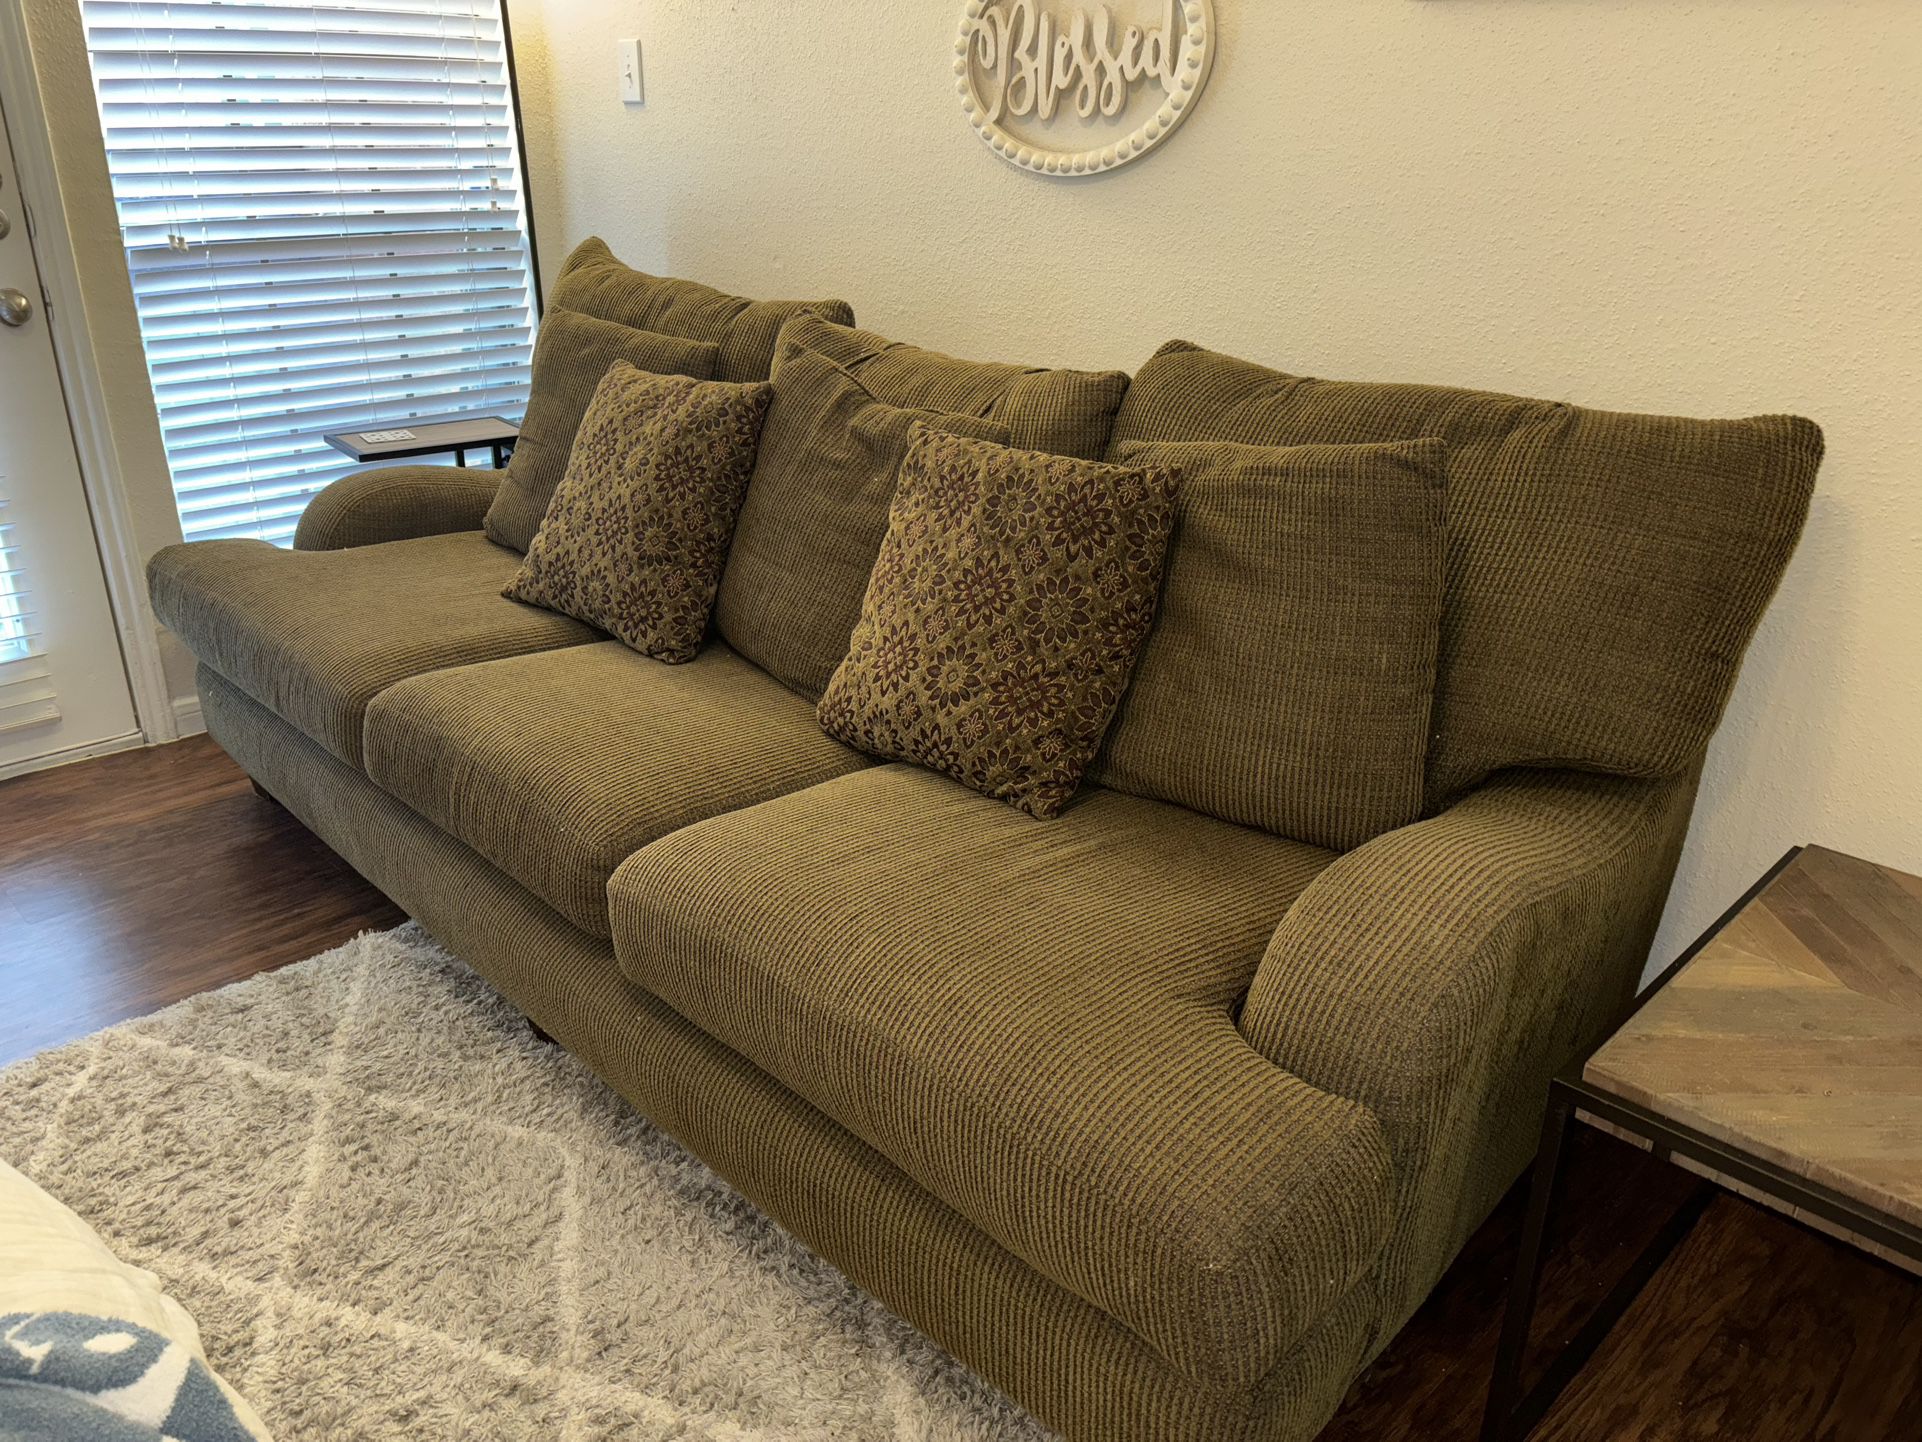 Super Comfortable Brown Couch + Pillows